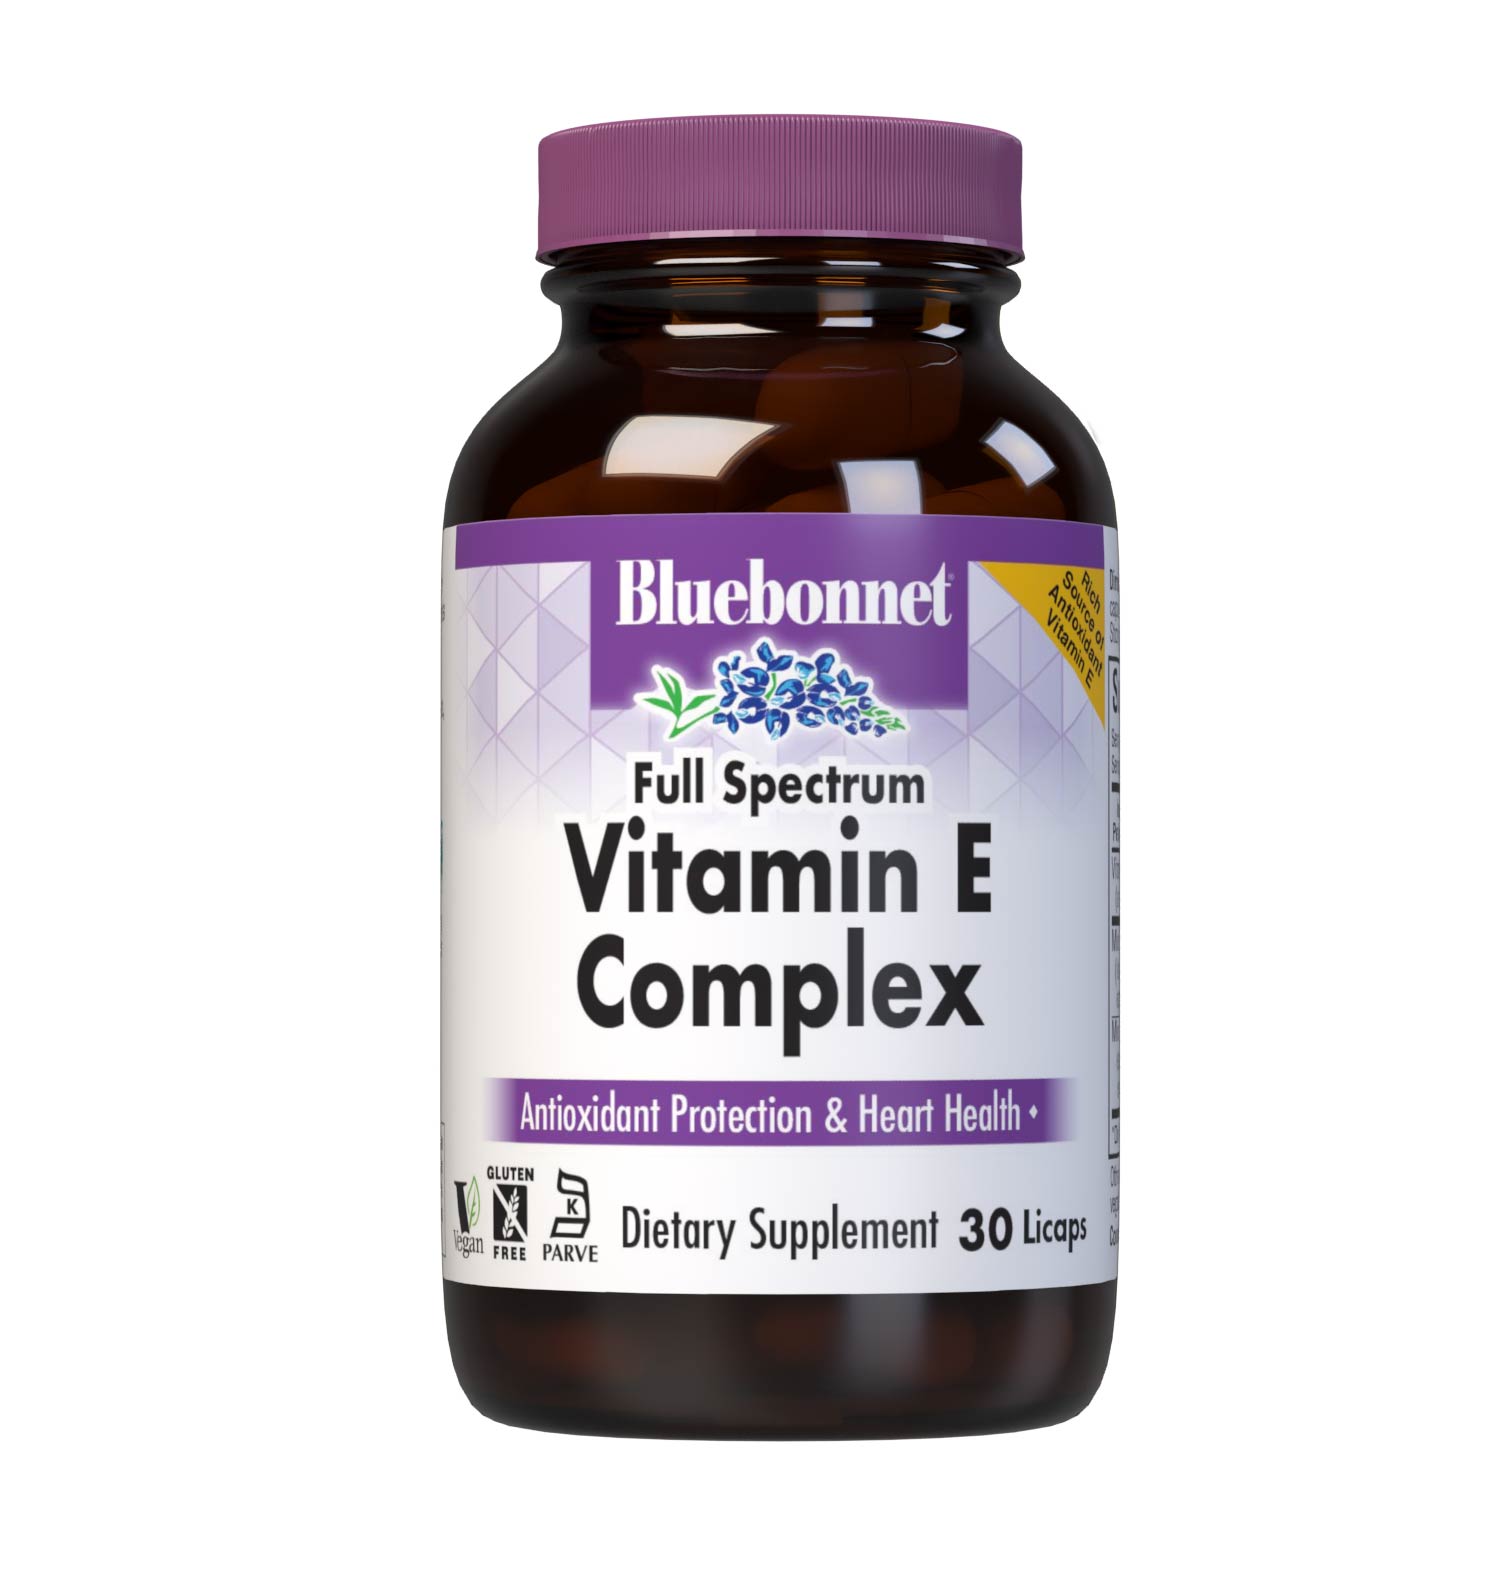 Bluebonnet’s Full Spectrum Vitamin E Complex 30 Licaps are specially formulated with d-alpha tocopherol and full spectrum tocopherol isomers (alpha, beta, delta and gamma) and tocotrienol isomers (alpha, beta, delta and gamma) from sustainably sourced, non-hydrogenated palm oil from Malaysia, which enforces strict environmental regulations. #size_30 count